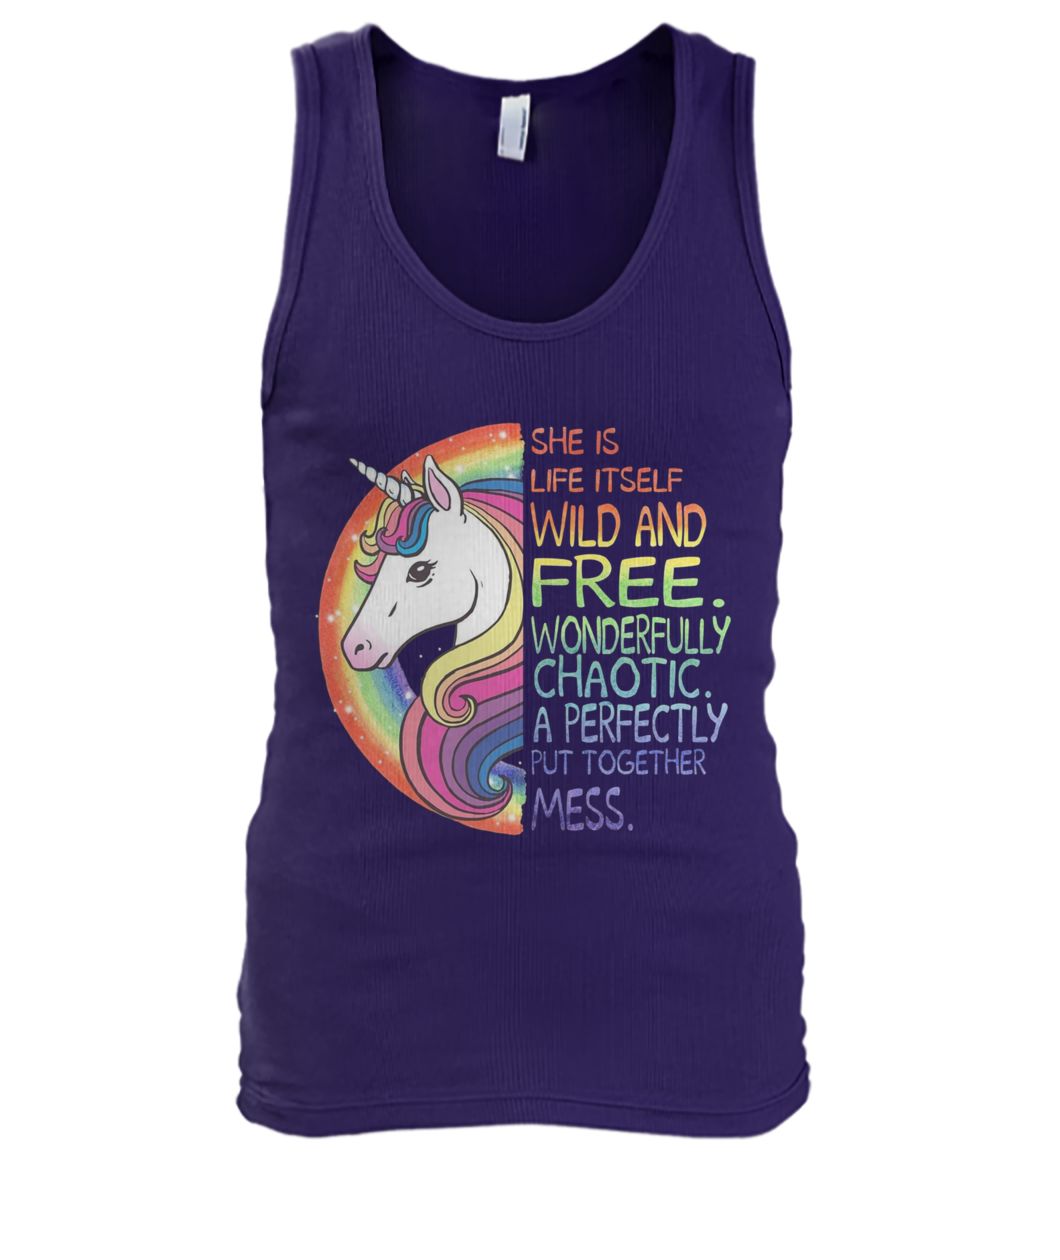 She is life itself wild and free wonderfully chaotic a perfectly put together mess unicorn men's tank top